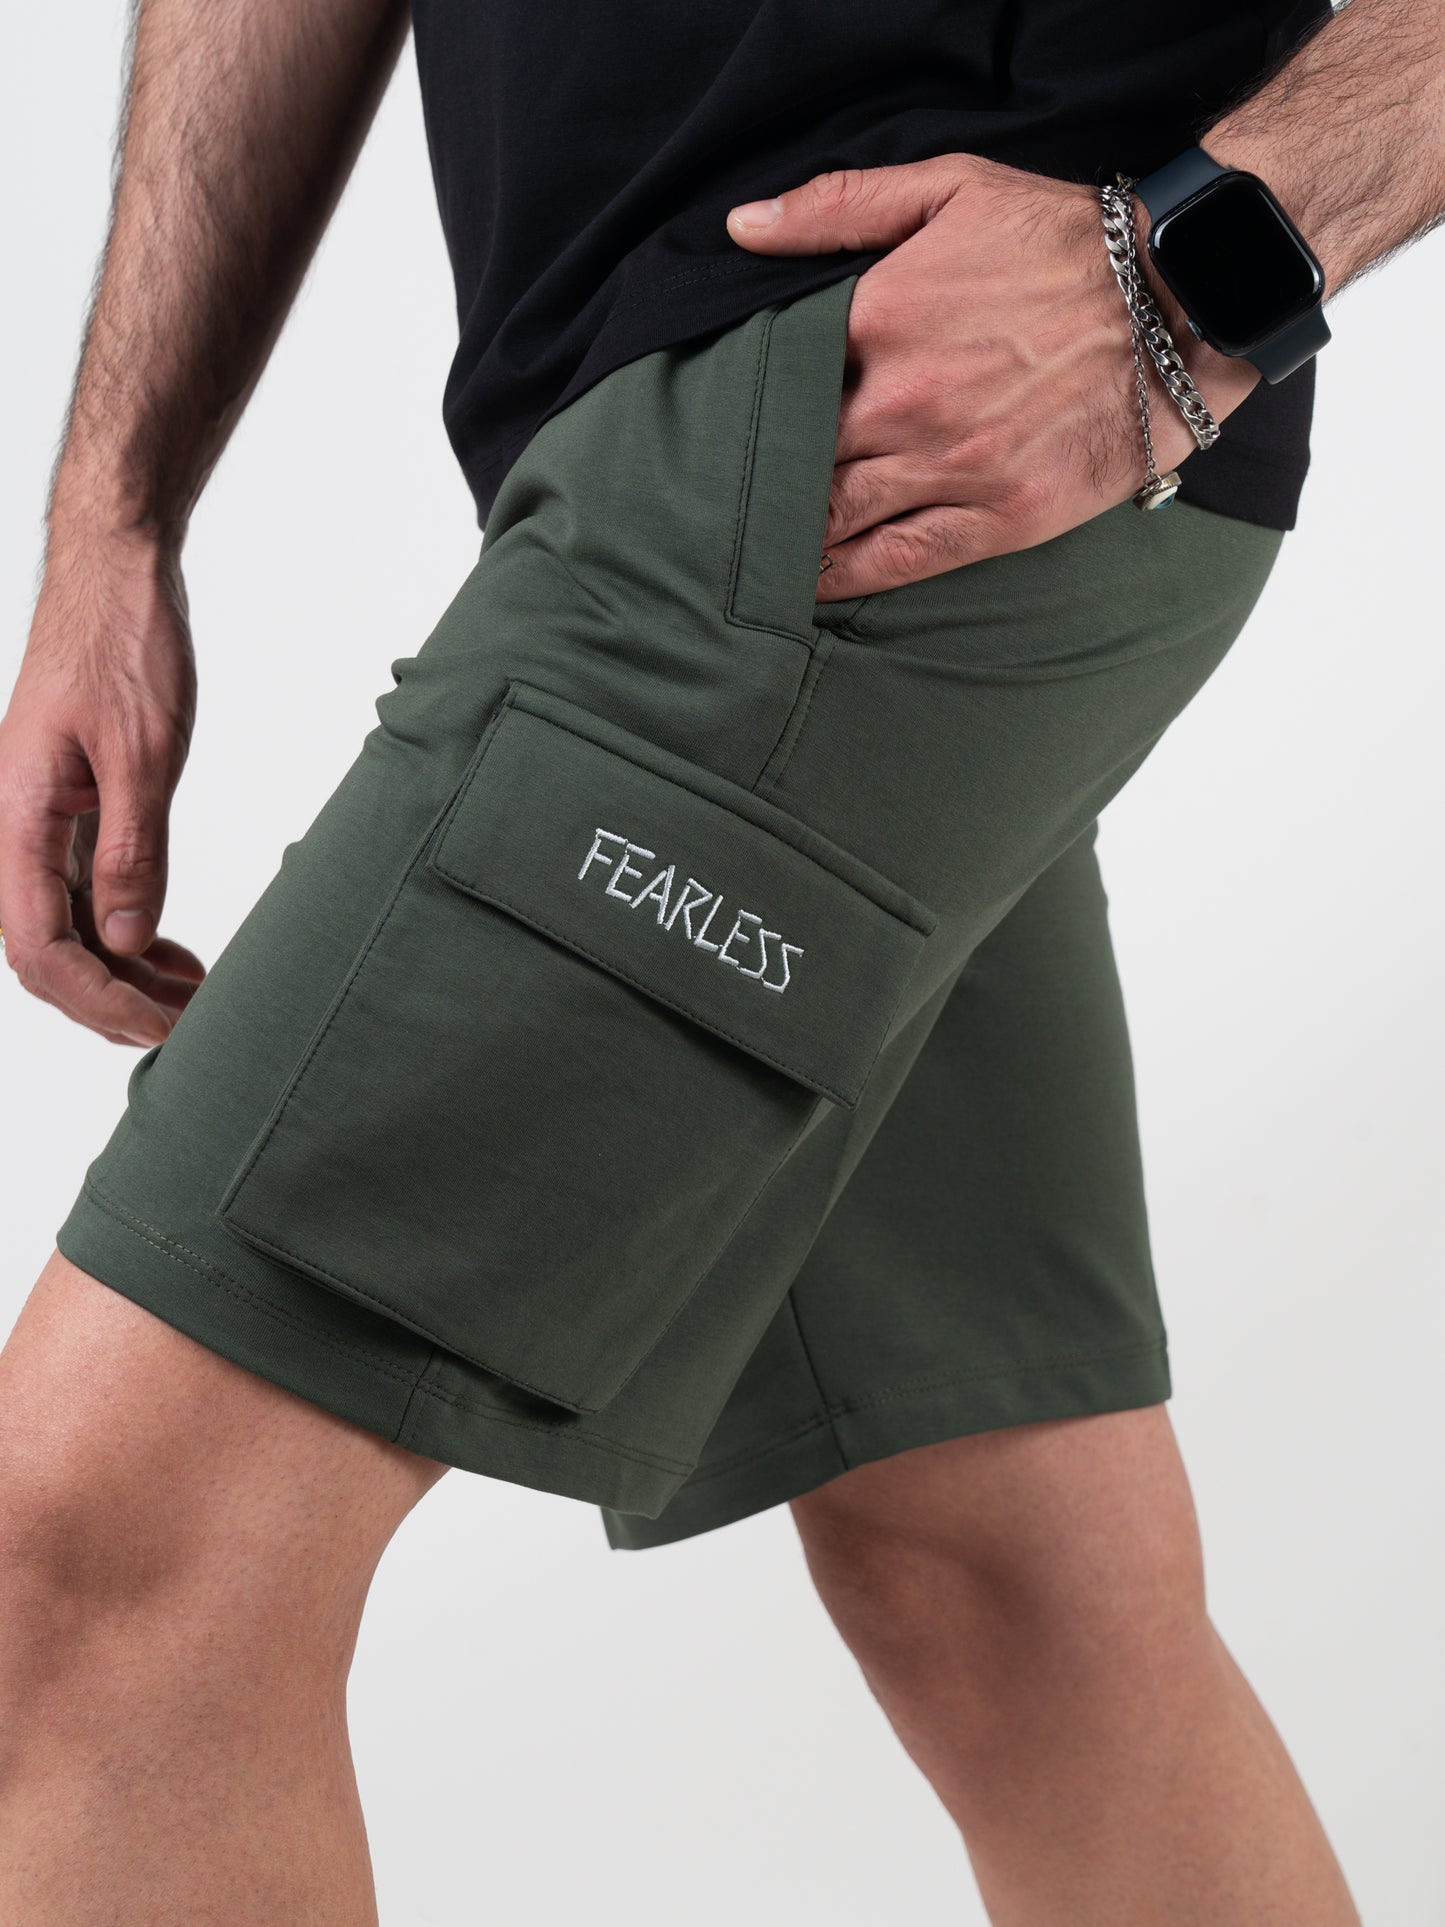 Fearless Cargo Shorts For Men - Olive Green